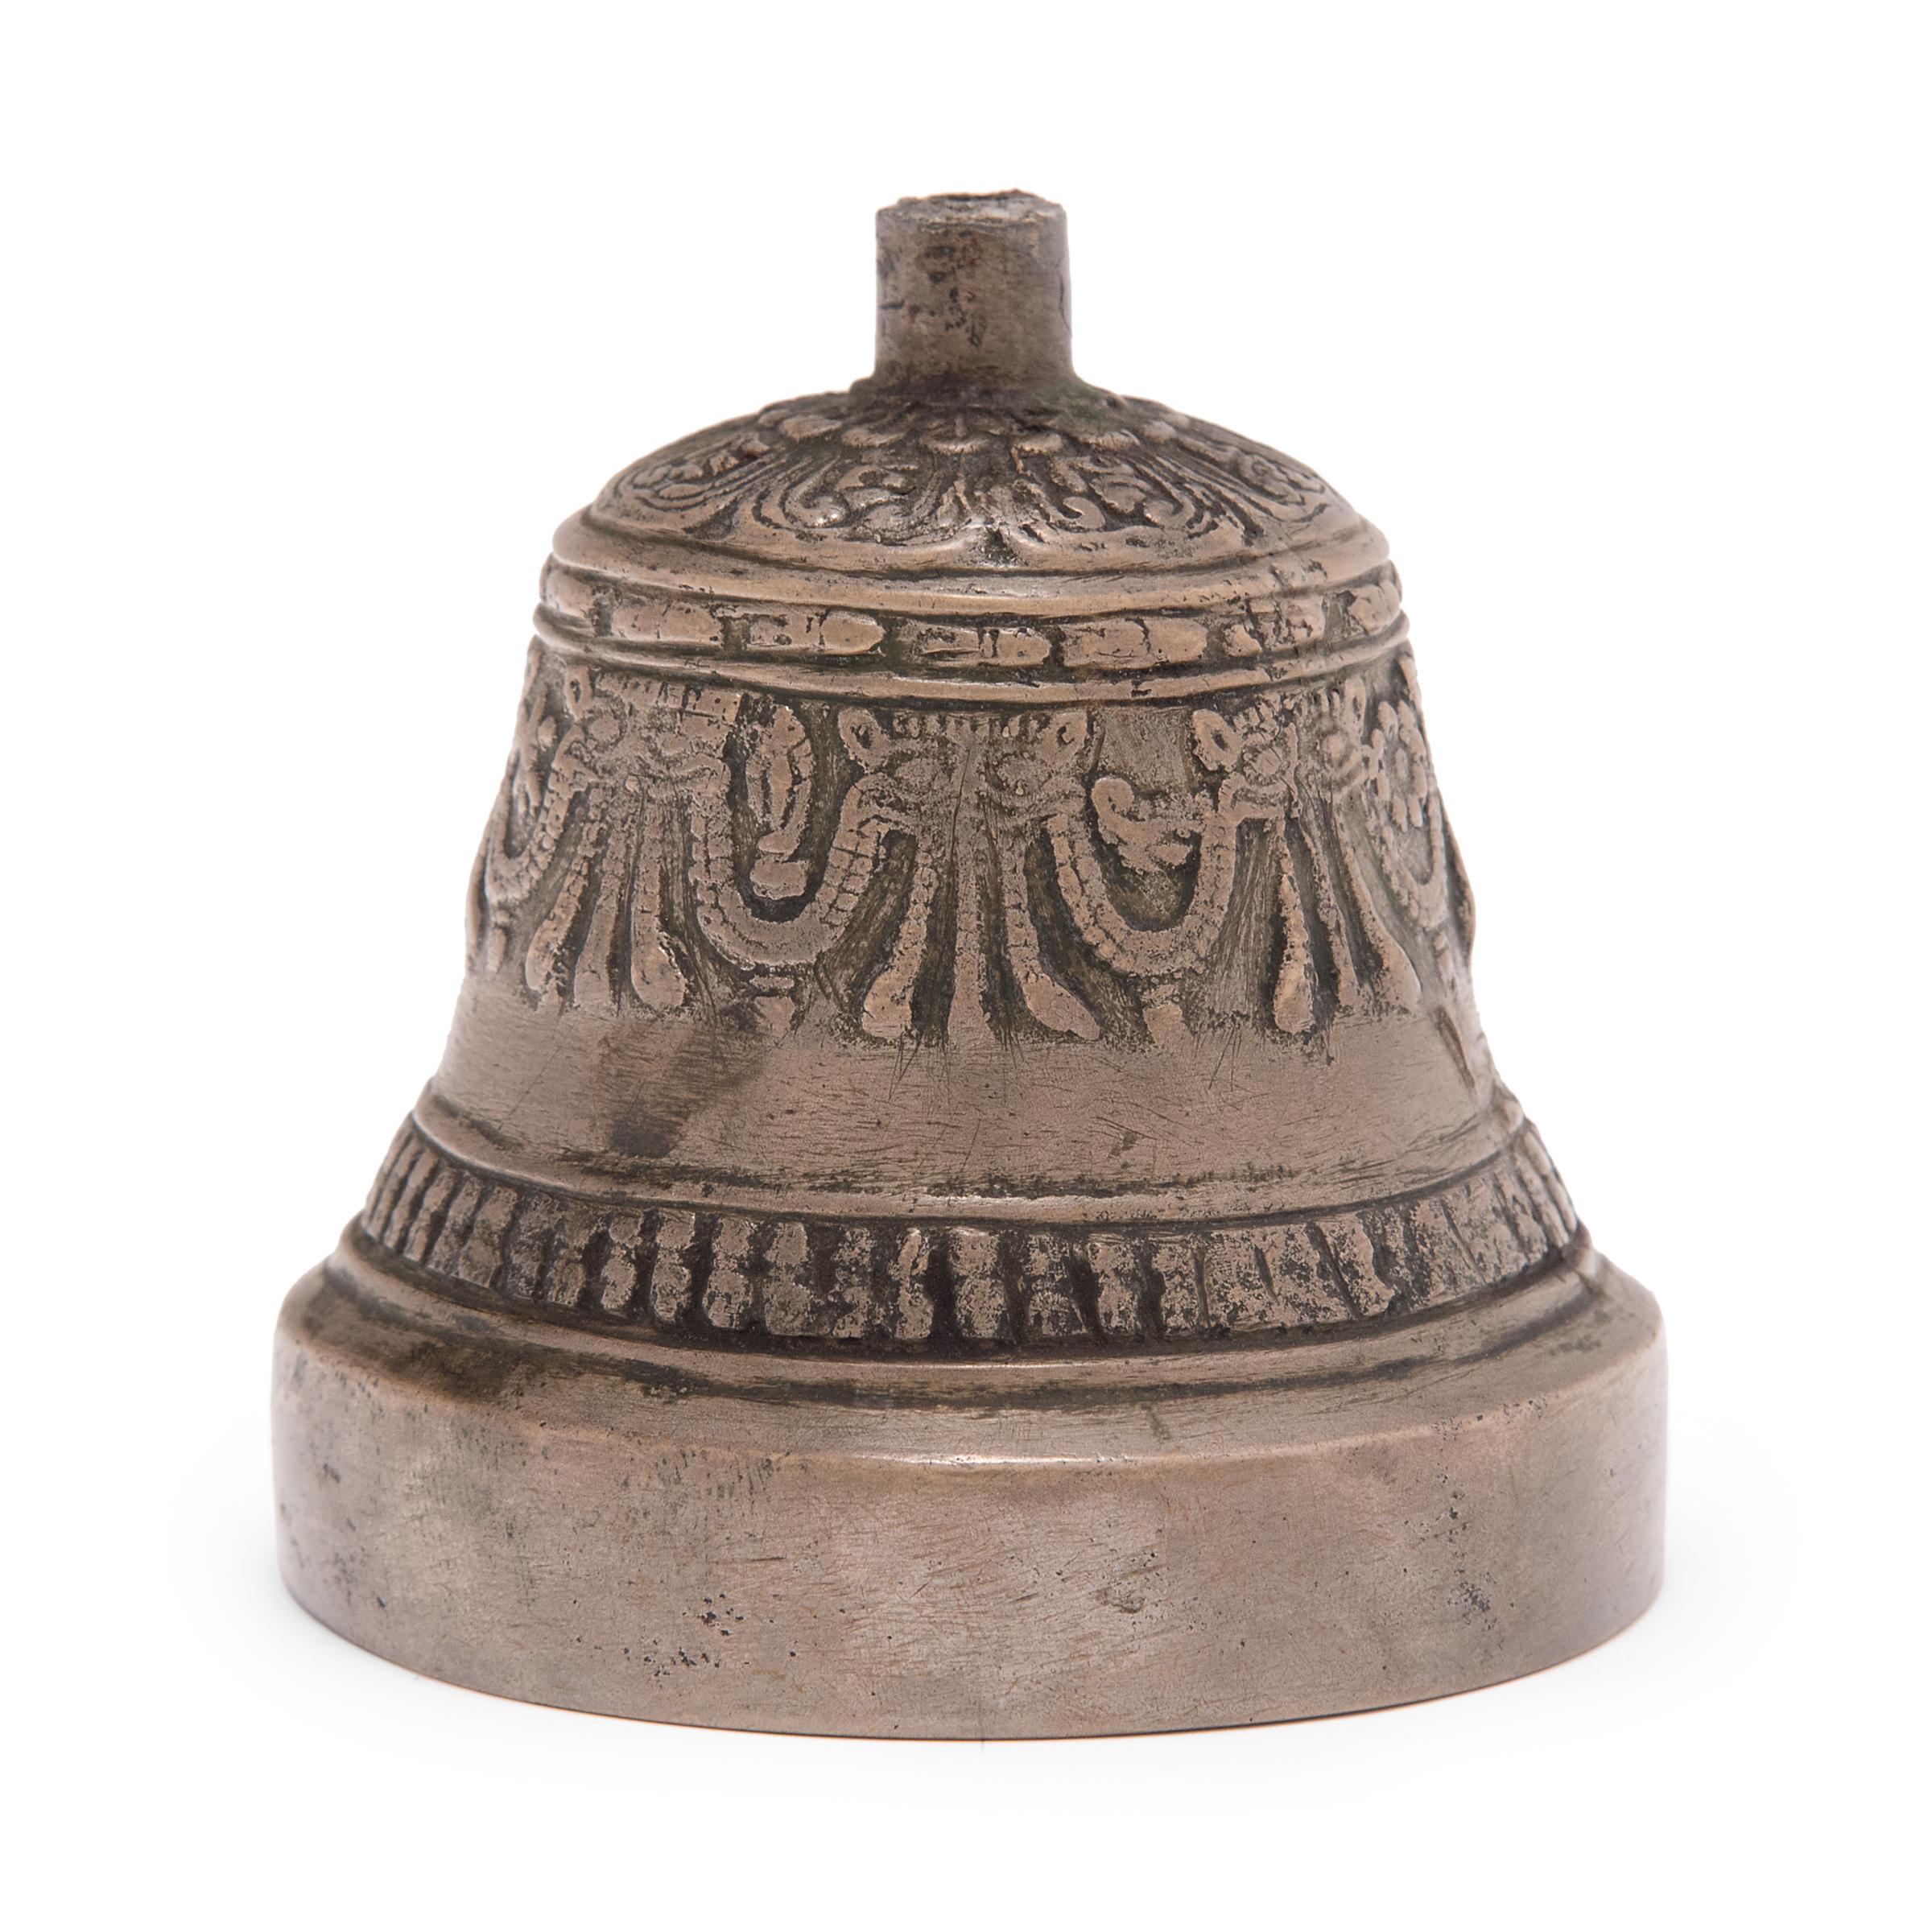 This small bronze bell is the lower half of a Tibetan ceremonial bell called a dril-bu. This example is missing its handle, which would have been shaped like a diamond scepter, or vajra, another ritual object symbolic of compassion. Used together